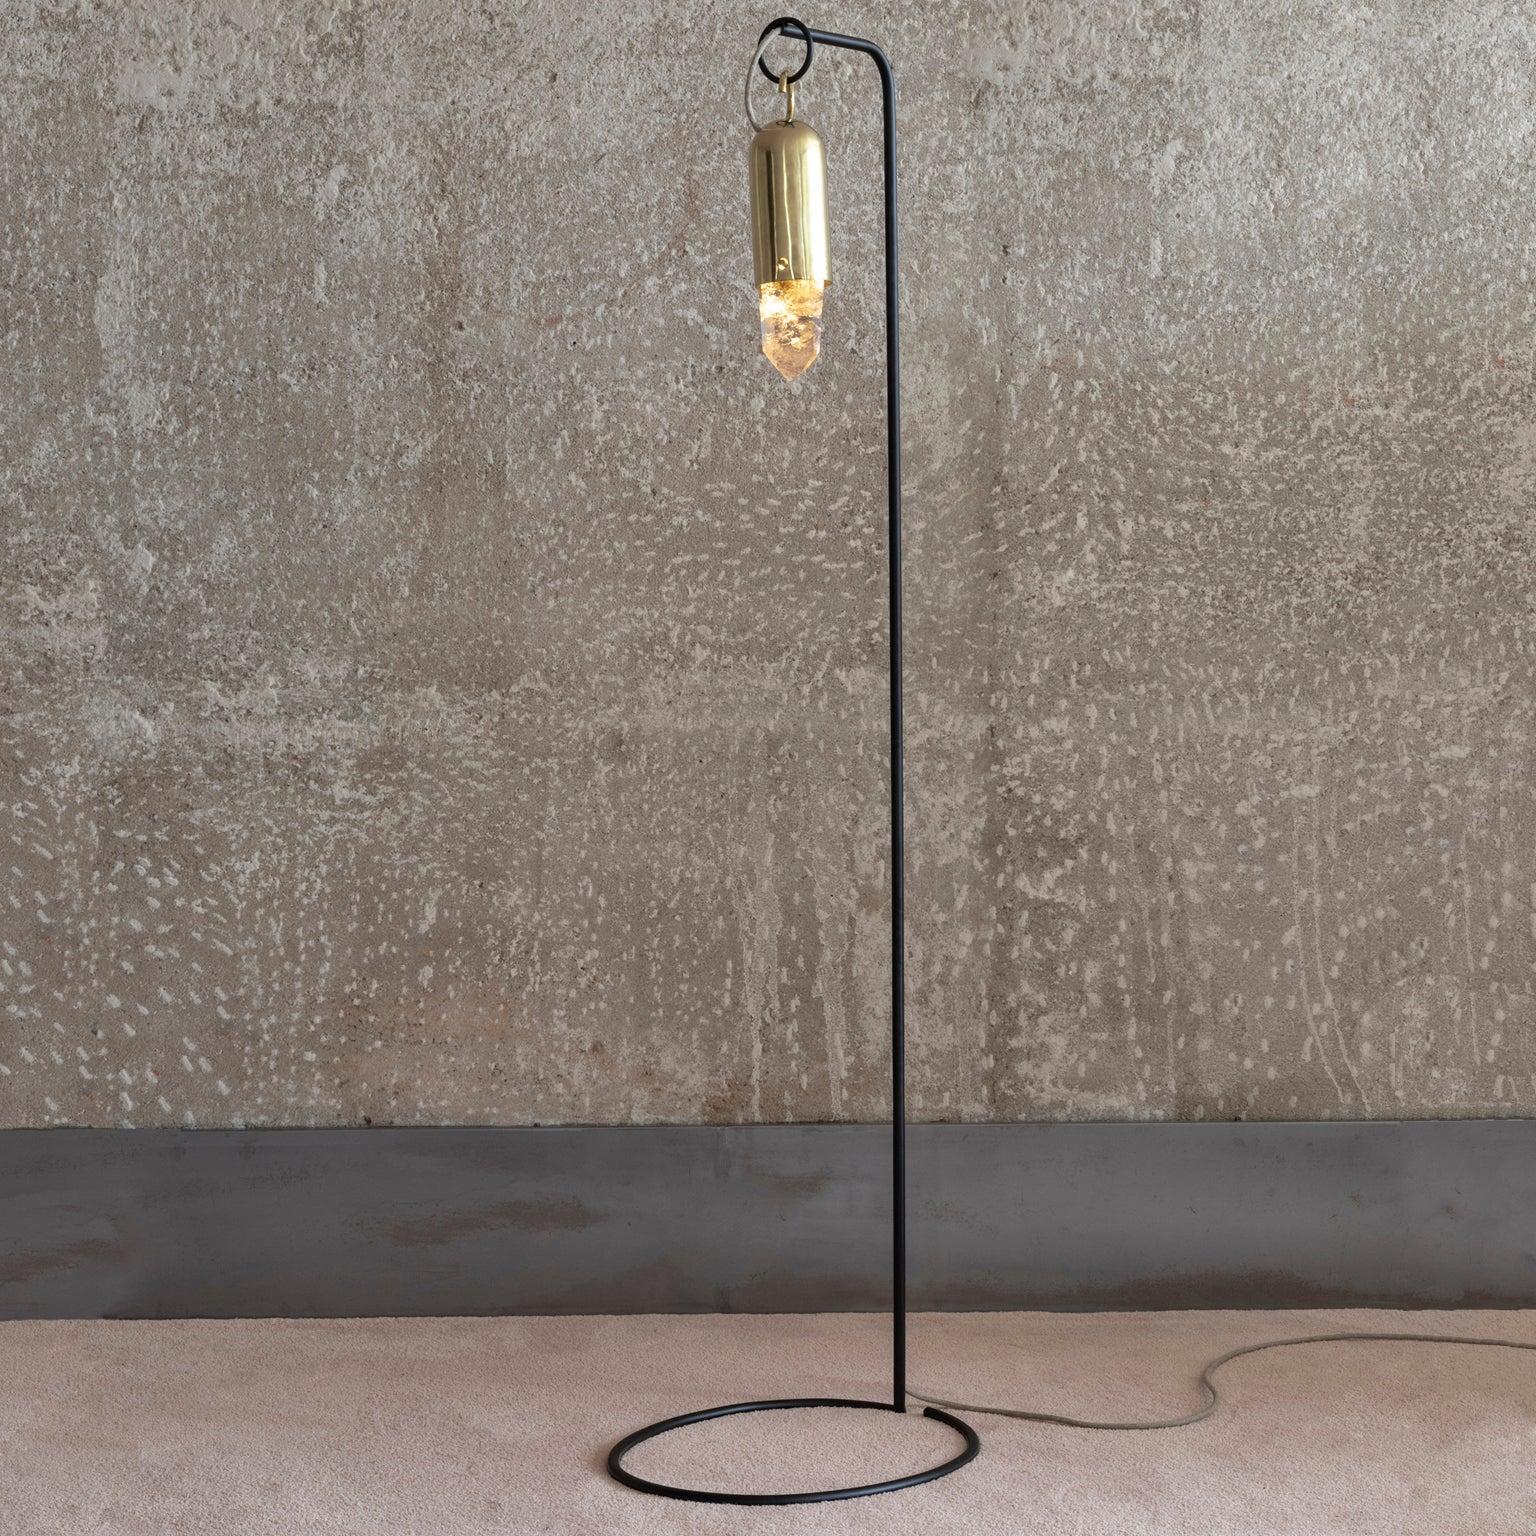 Contemporary golden floor lamp, in cast brass and Illuminated Raw Crystal.
Produced in São Paulo, Brazil.

This golden floor lamp was meticulously handmade by master artisans one delicate piece at a time. It is therefore quite difficult, if not